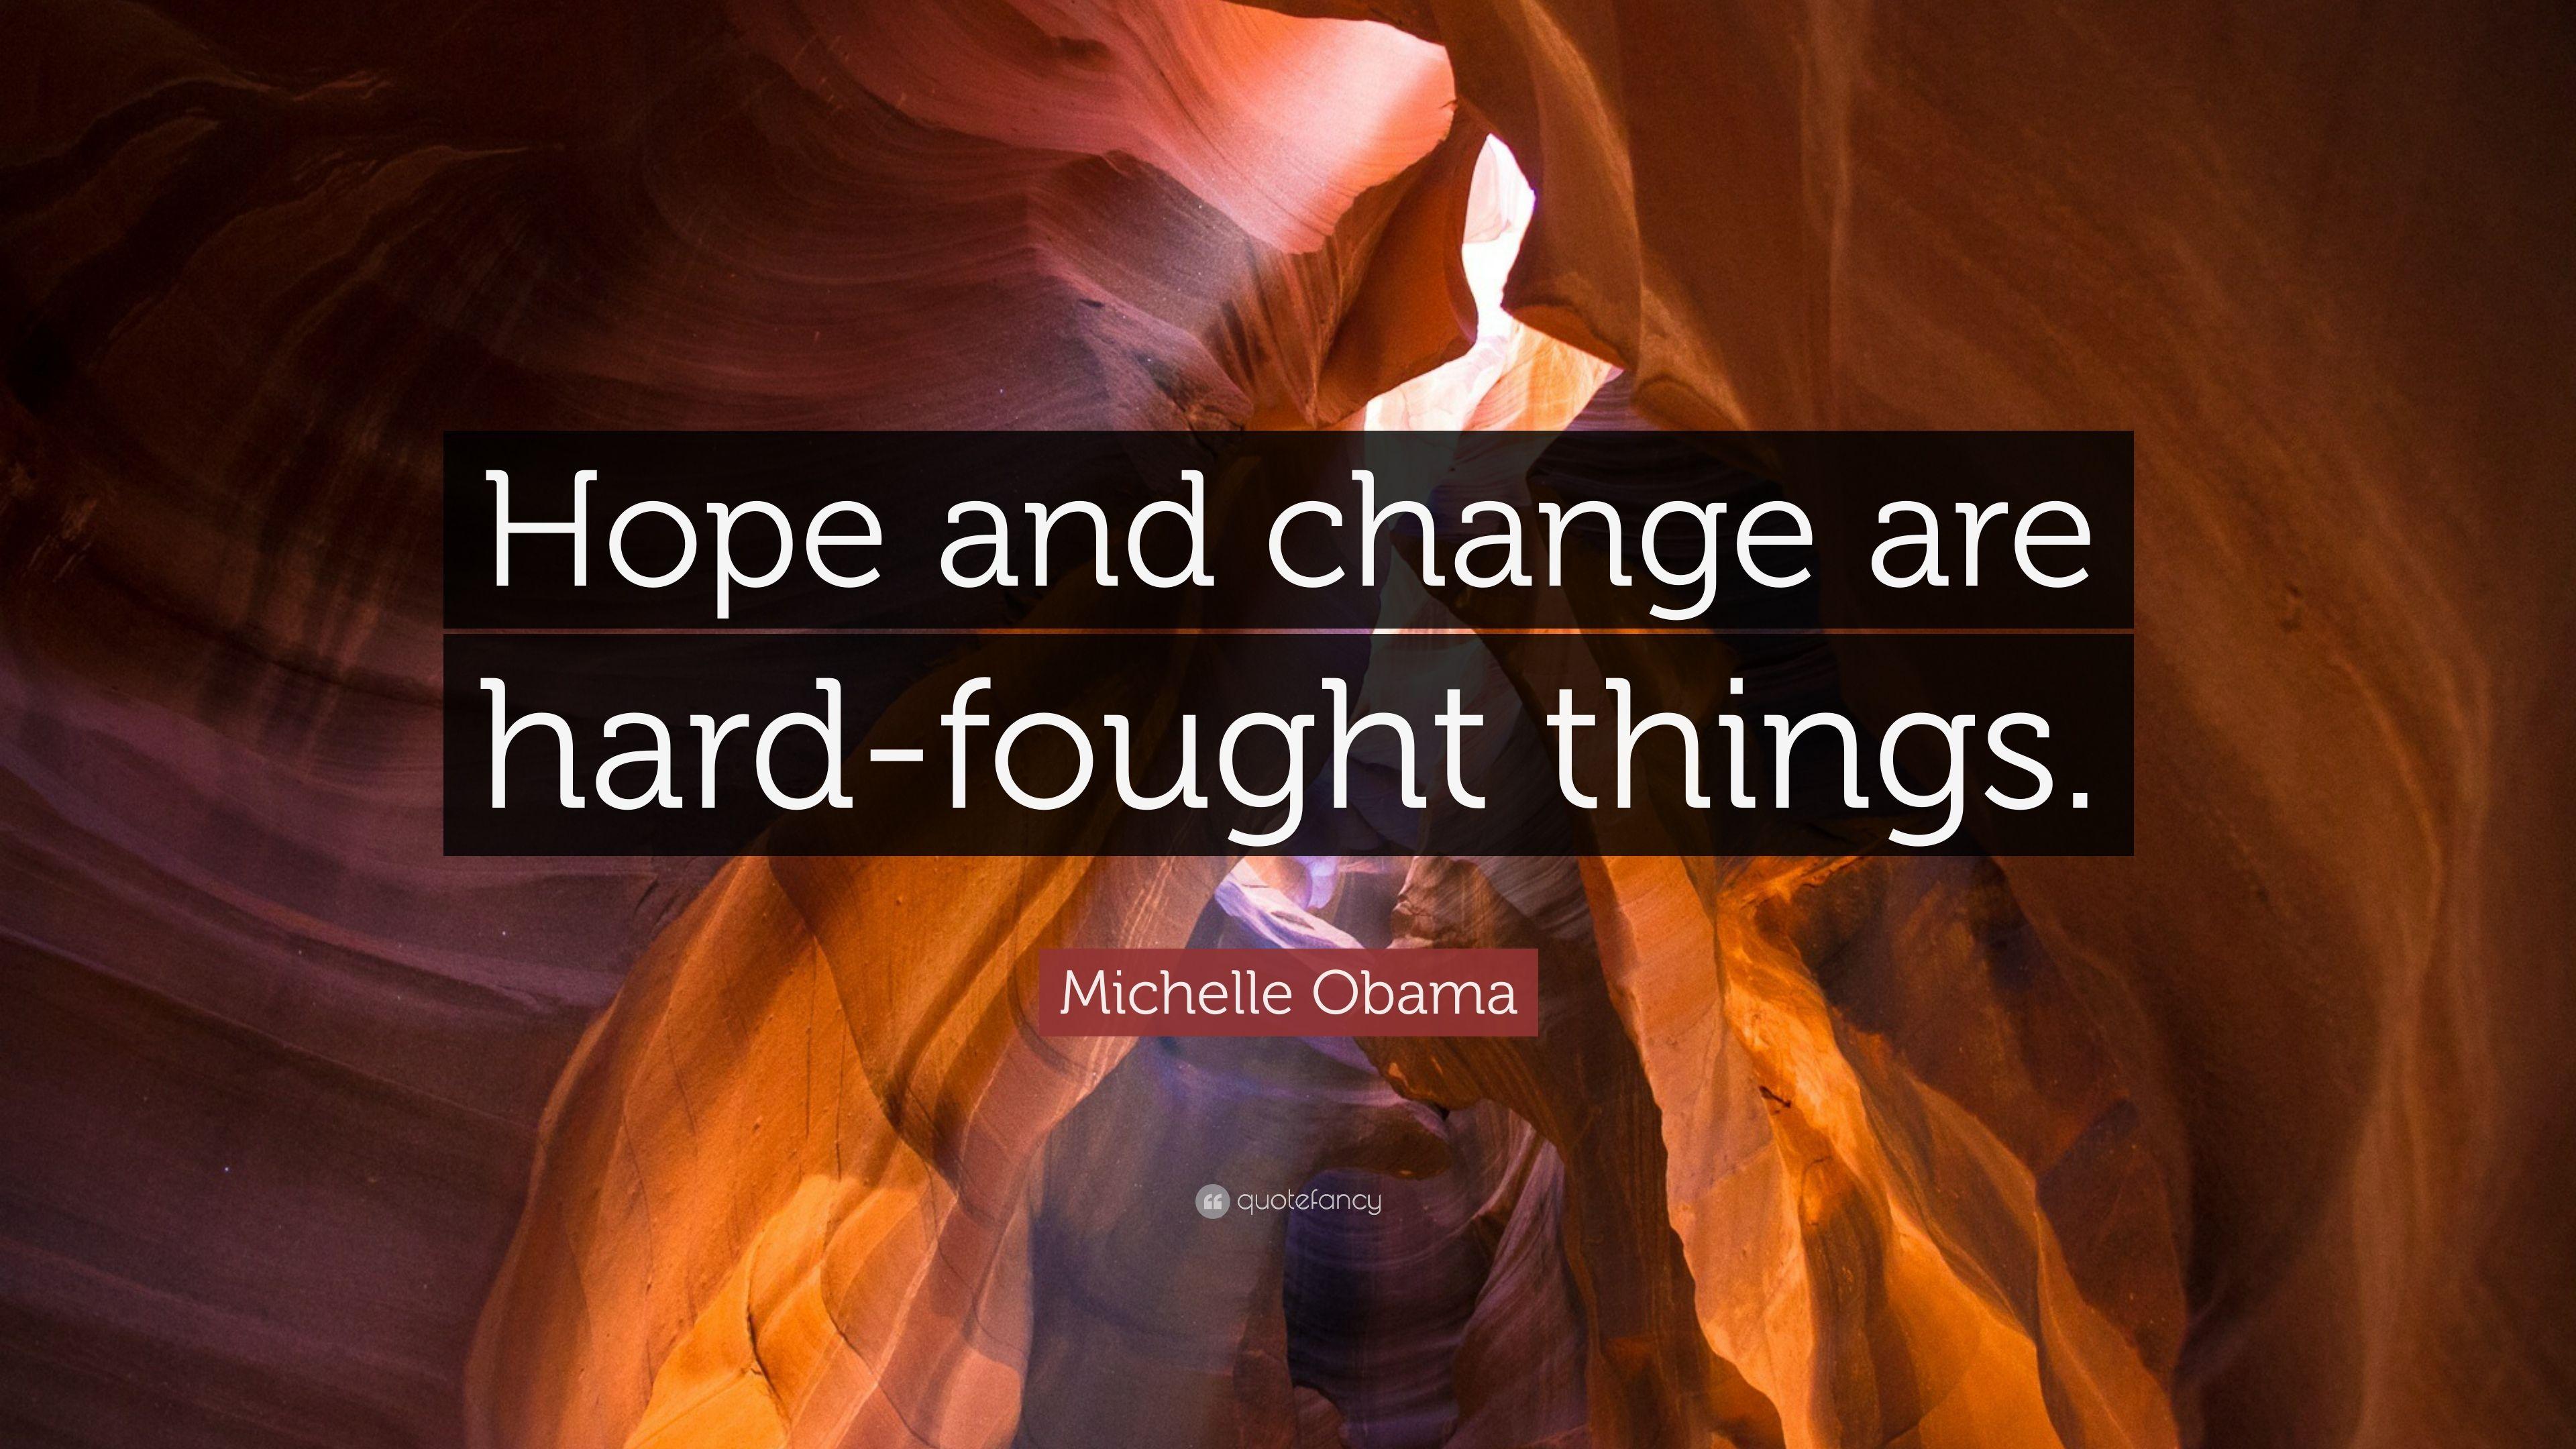 Michelle Obama Quote: “Hope And Change Are Hard Fought Things.” 1